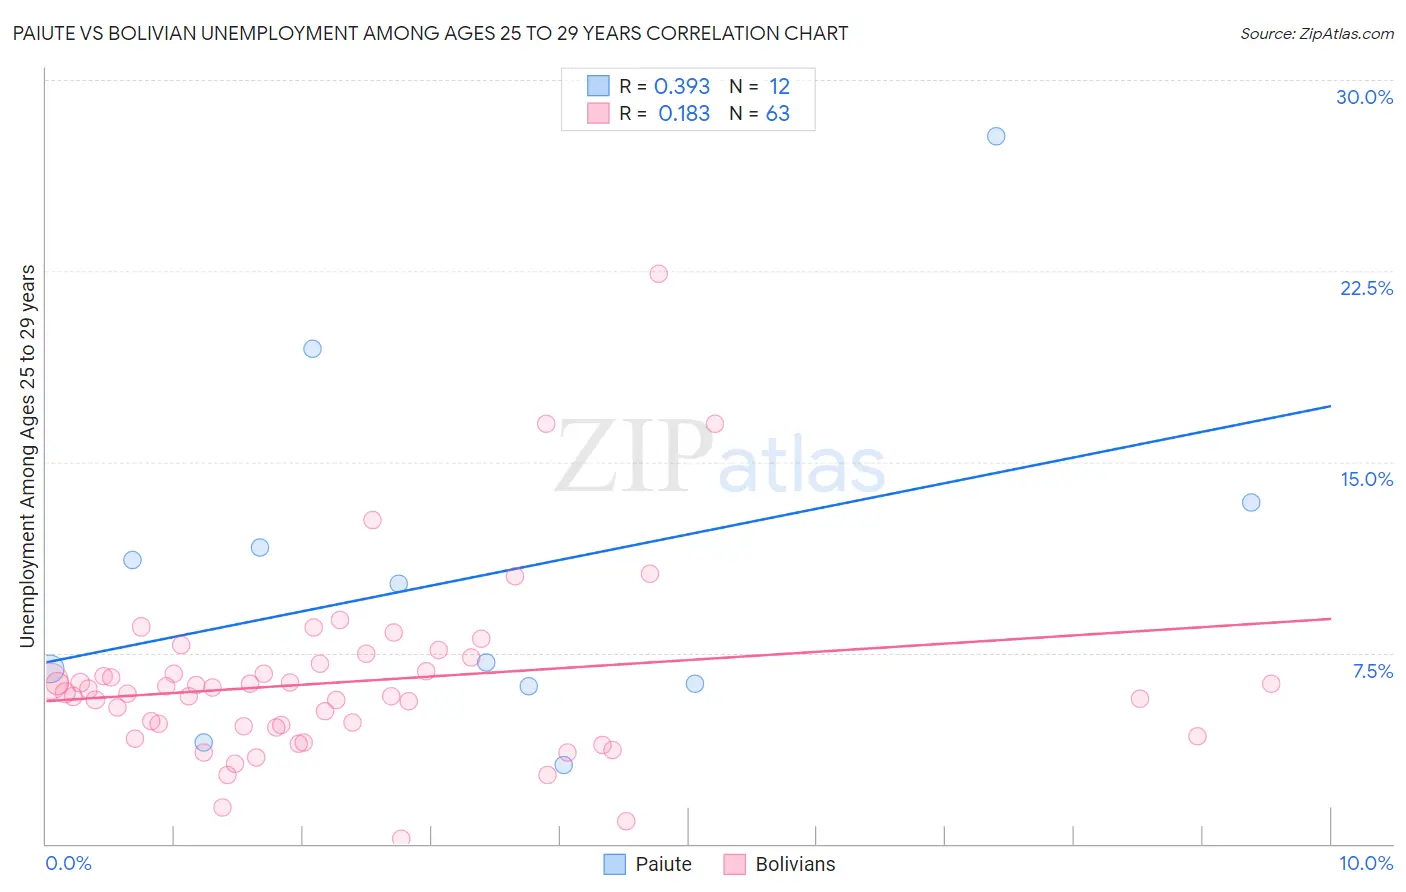 Paiute vs Bolivian Unemployment Among Ages 25 to 29 years